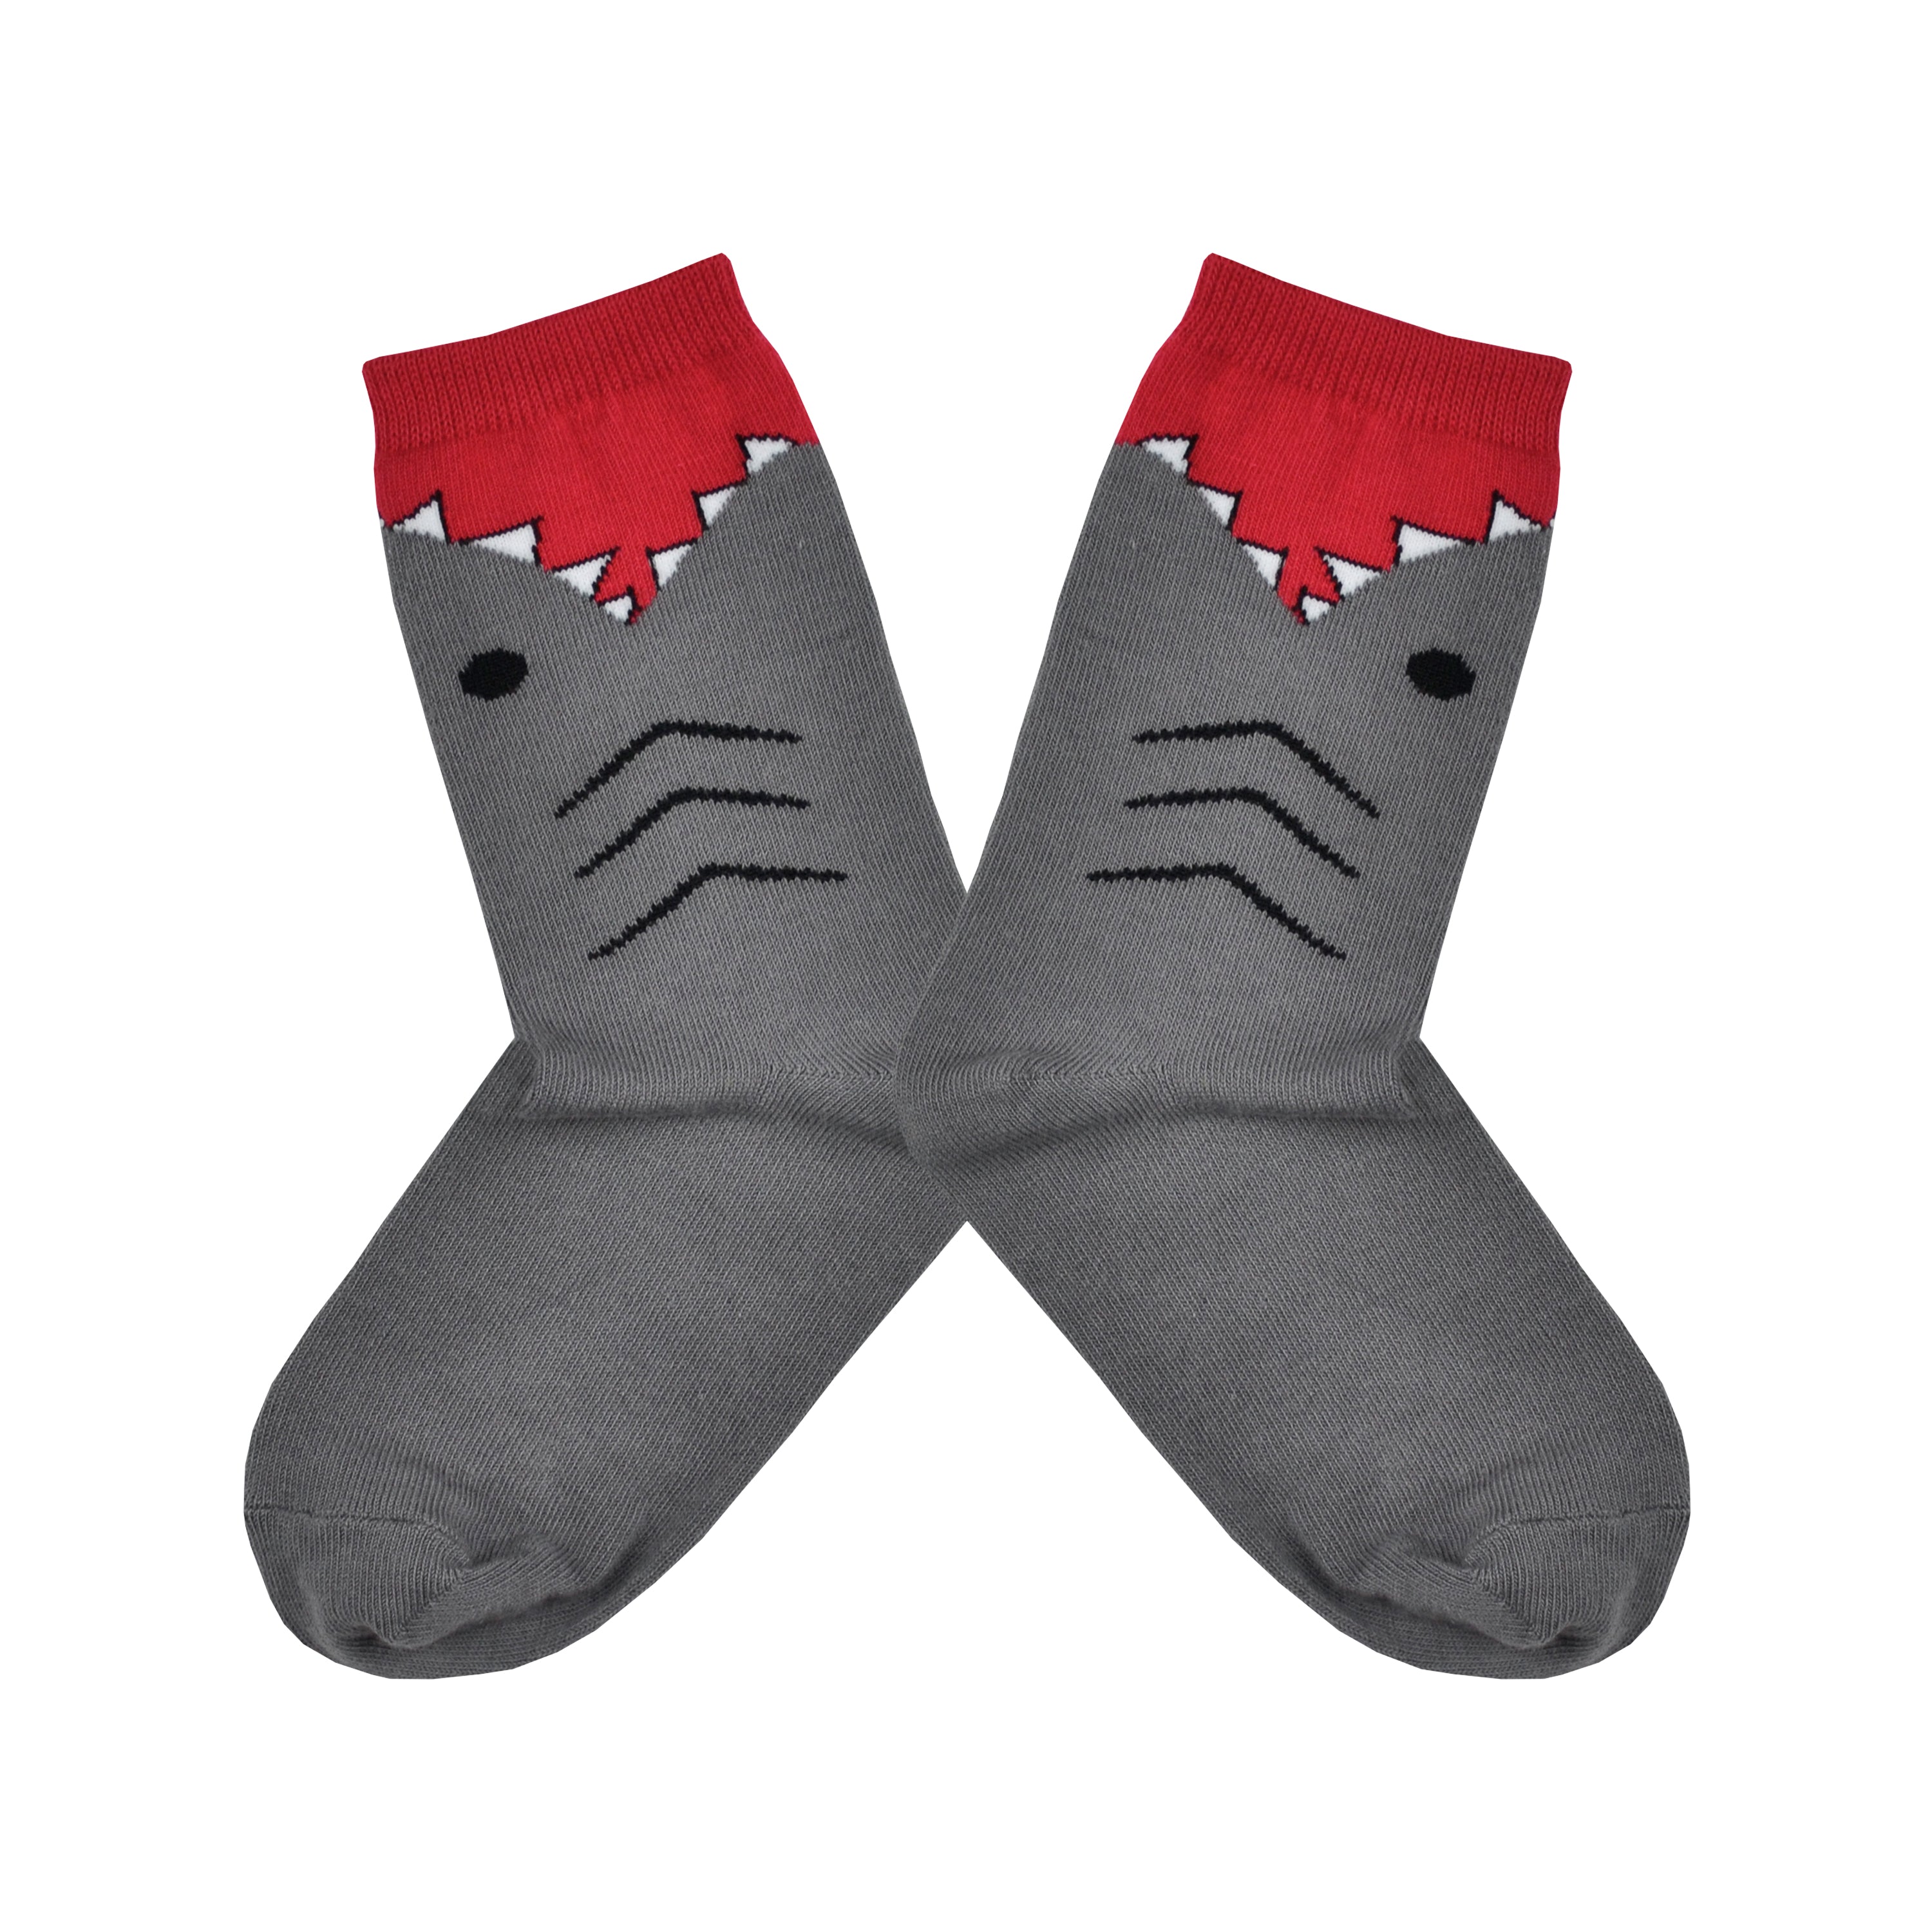 Shown in a flatlay, a pair of K.Bell brand grey cotton kids crew socks. The foot and heel of the sock are grey with the top being red with the design of shark teeth around it.